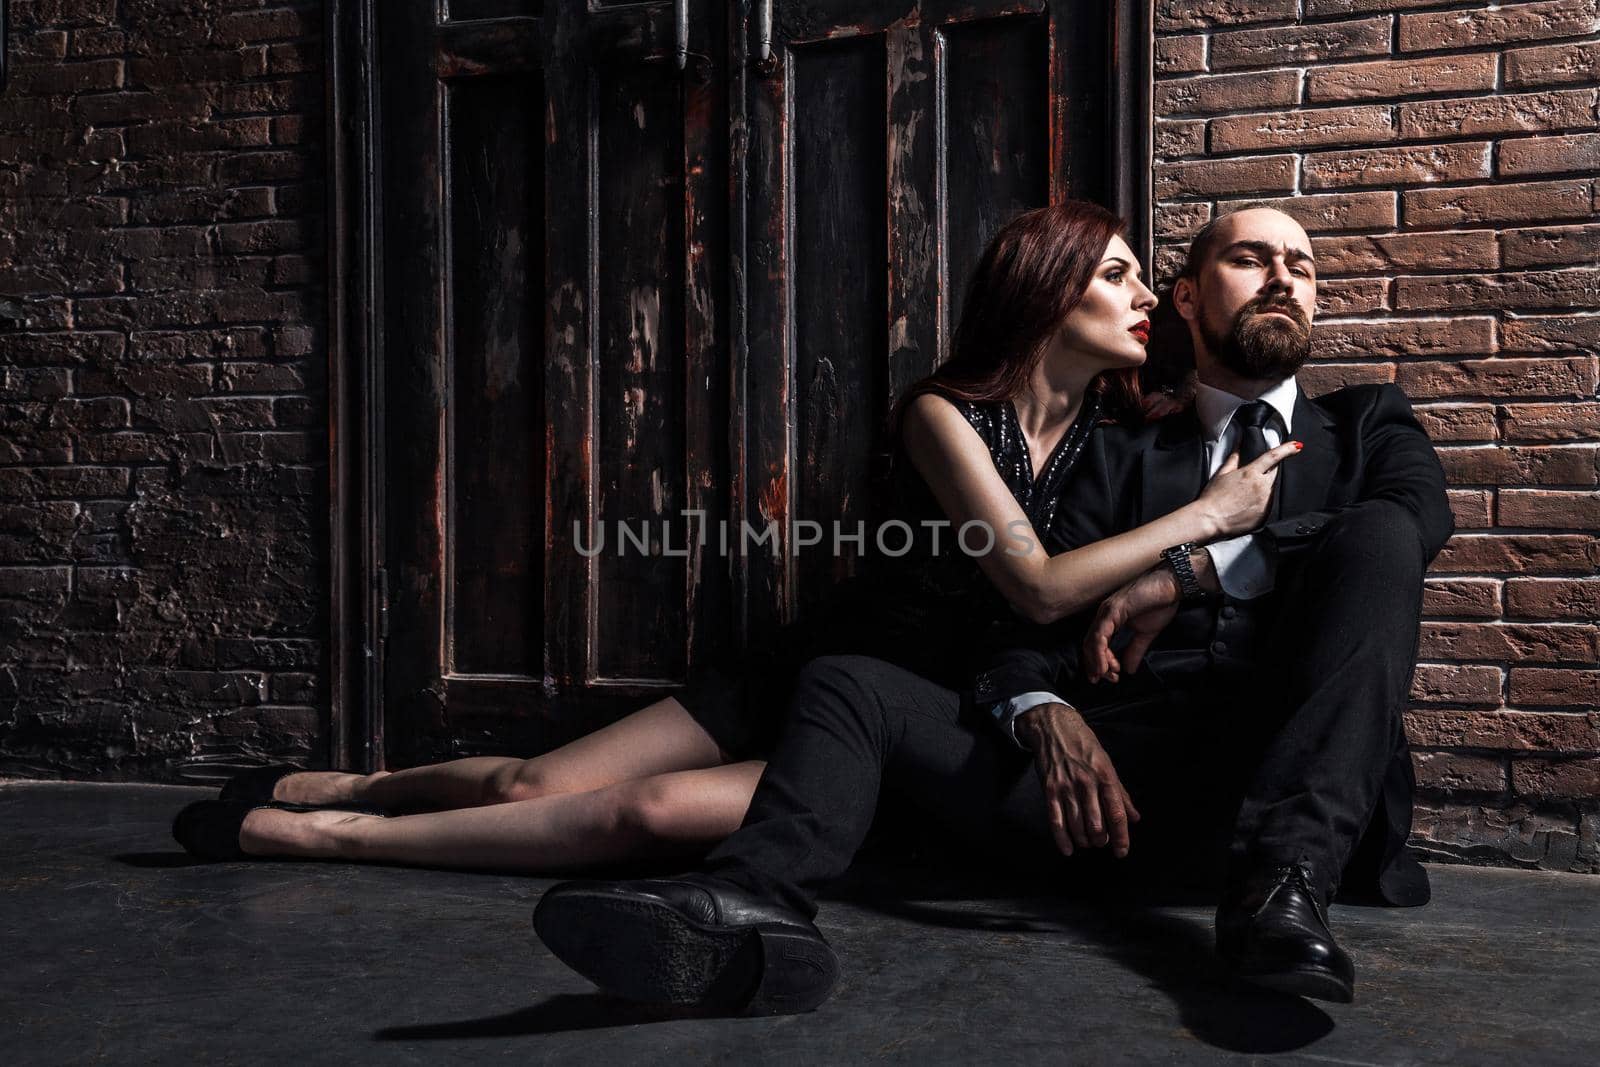 Man in suit and woman in evening dress sitting on his lap. Ginger woman looks at him and wants to kiss. Studio shot, brick wall